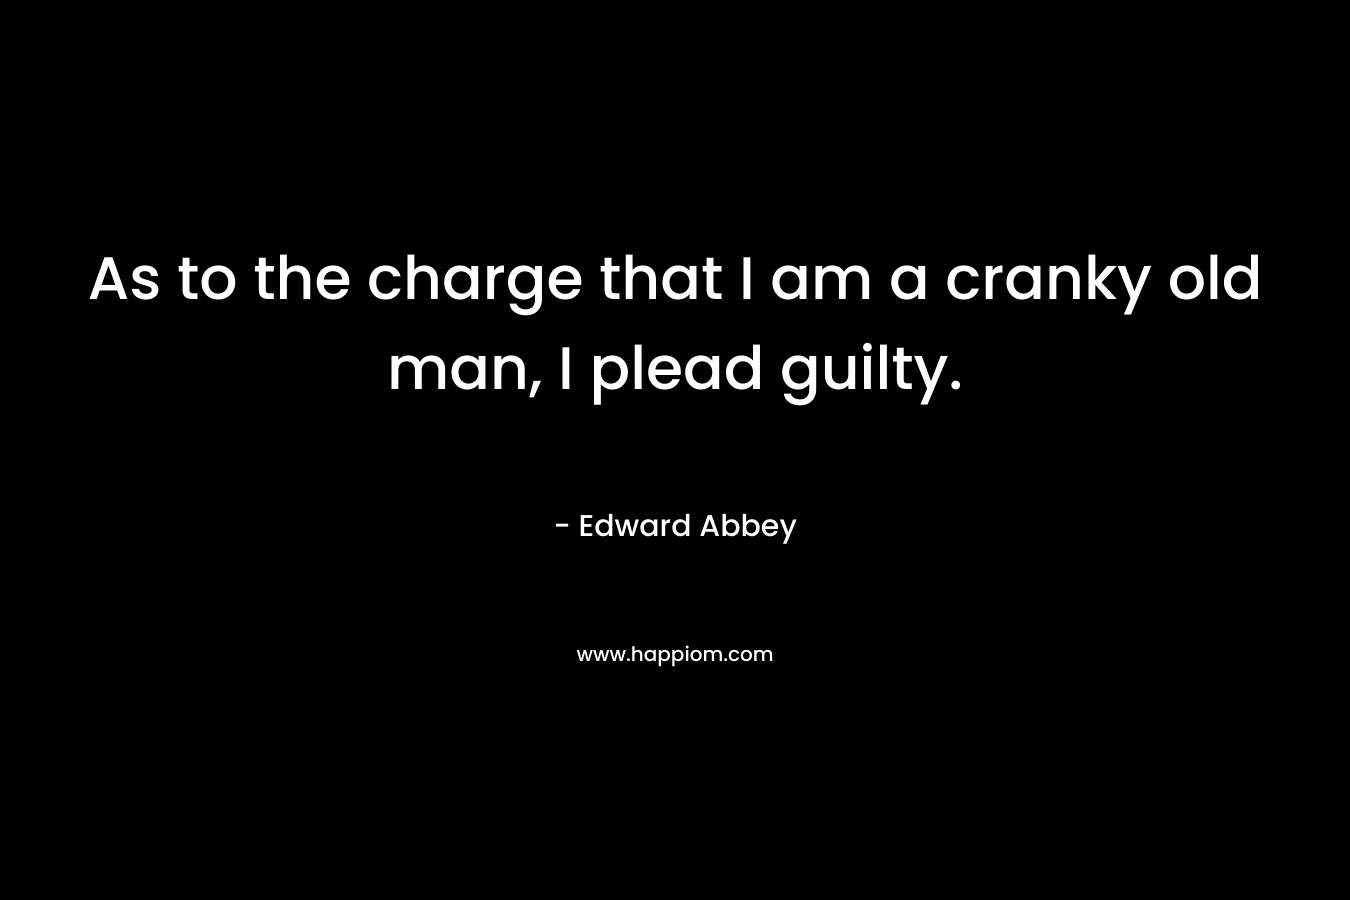 As to the charge that I am a cranky old man, I plead guilty. – Edward Abbey